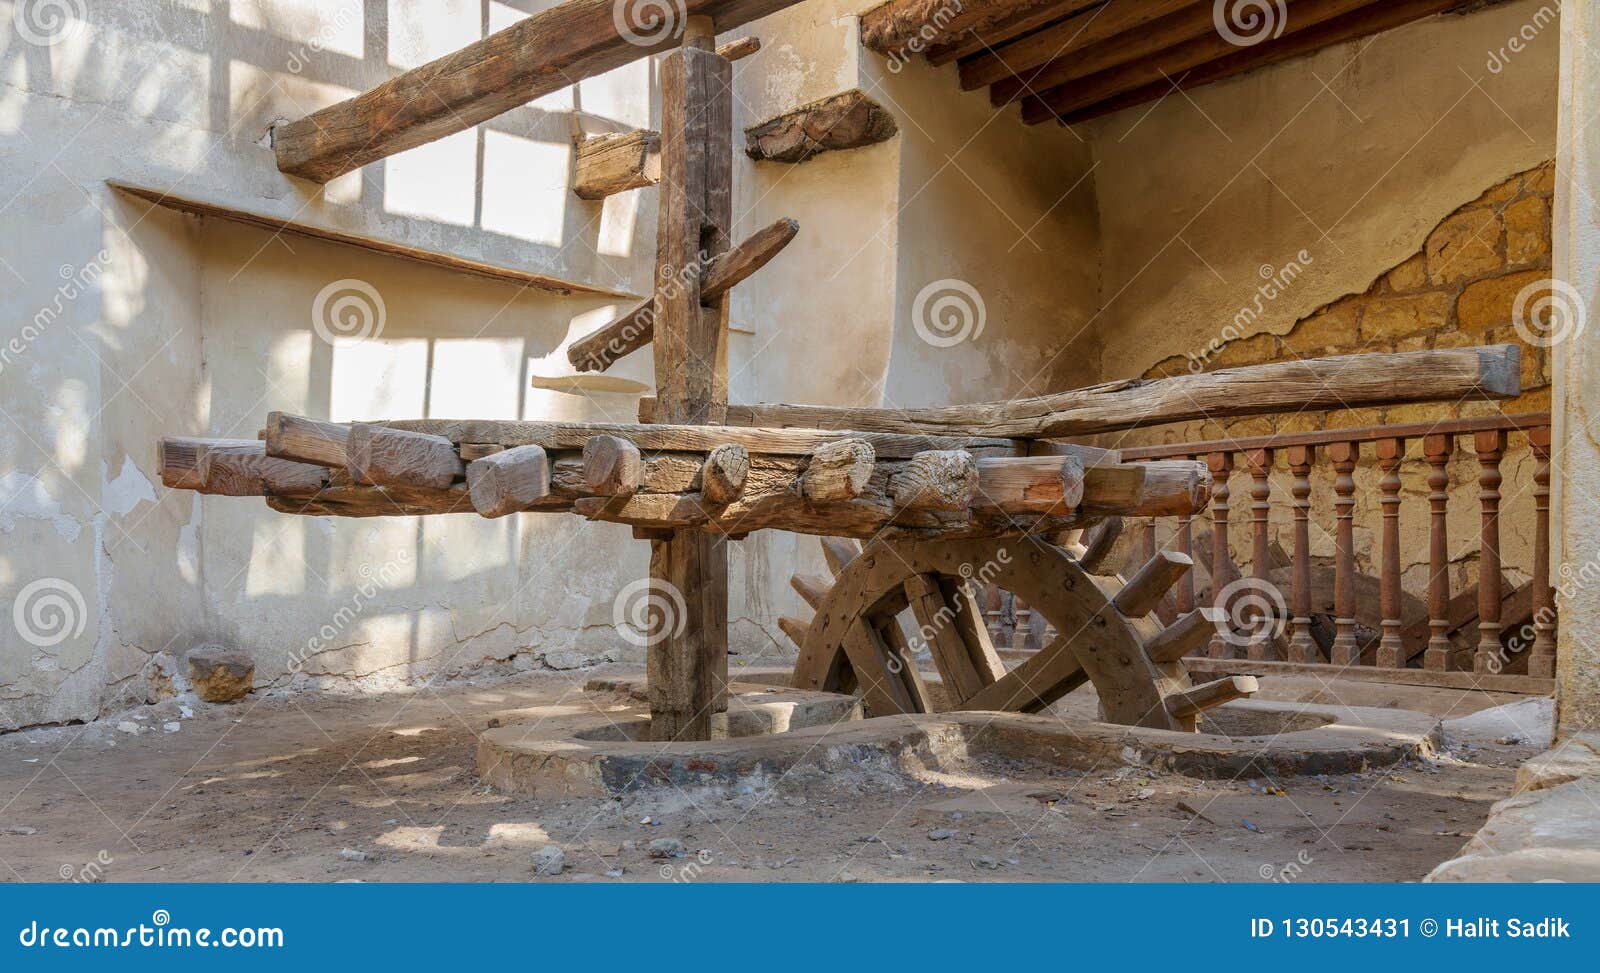 ancient rotary flour mill used to be rotated by animal power in front of el sehemy historic house, cairo, egypt